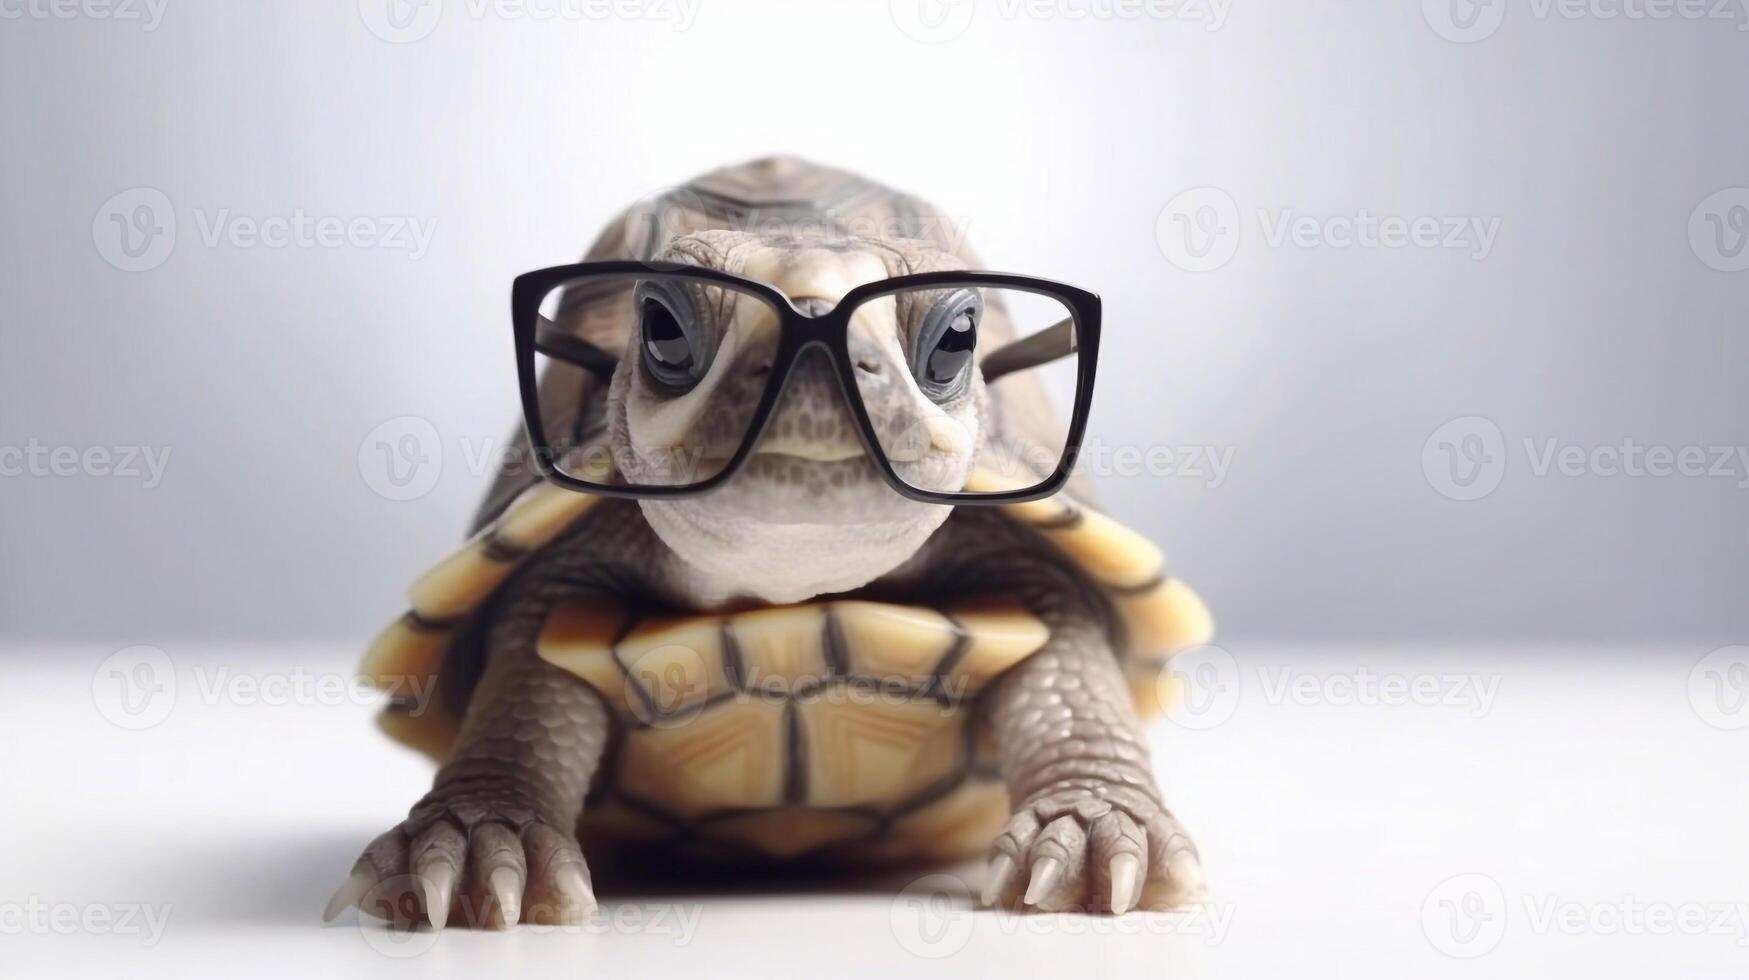 A turtle wearing glasses is wearing a pair of glasses. - photo